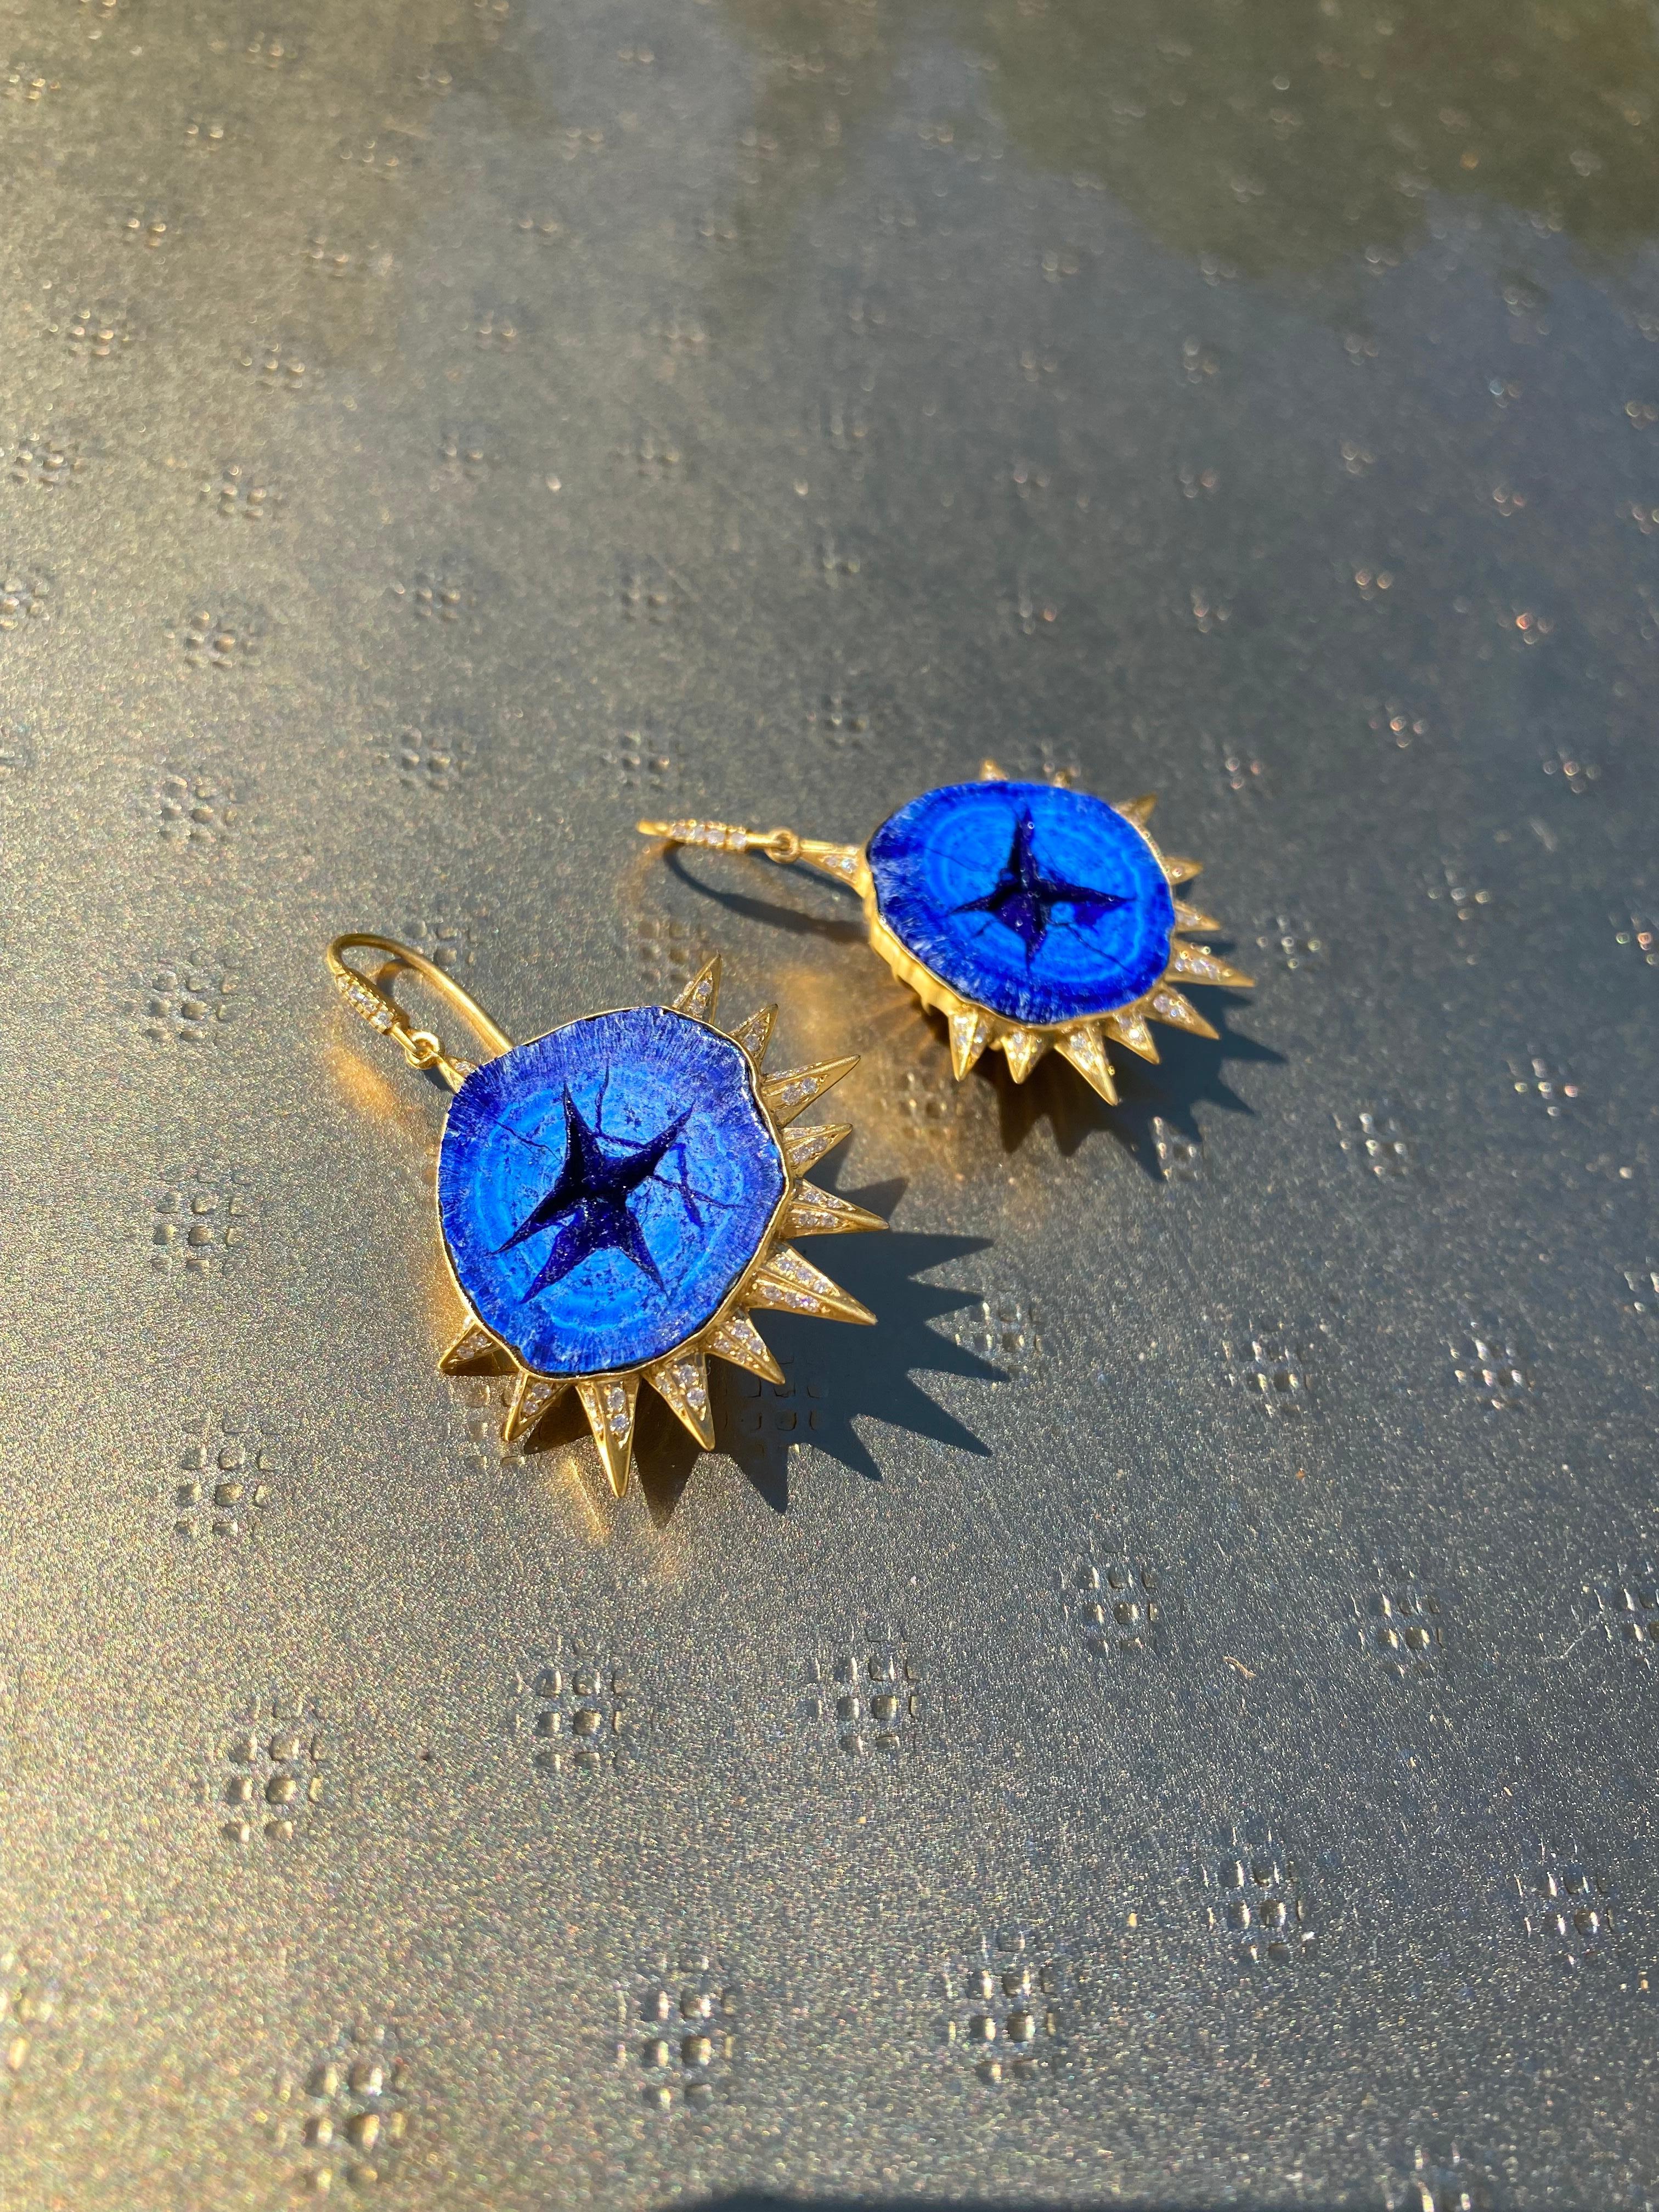 Designed by award winning jewelry designer, Lauren Harper, these stunning Blue Azurite and Diamond earrings in 18kt Gold are sure to get you noticed. Edgy, contemporary, completely perfect!  Ships directly from original designer, Lauren Harper.